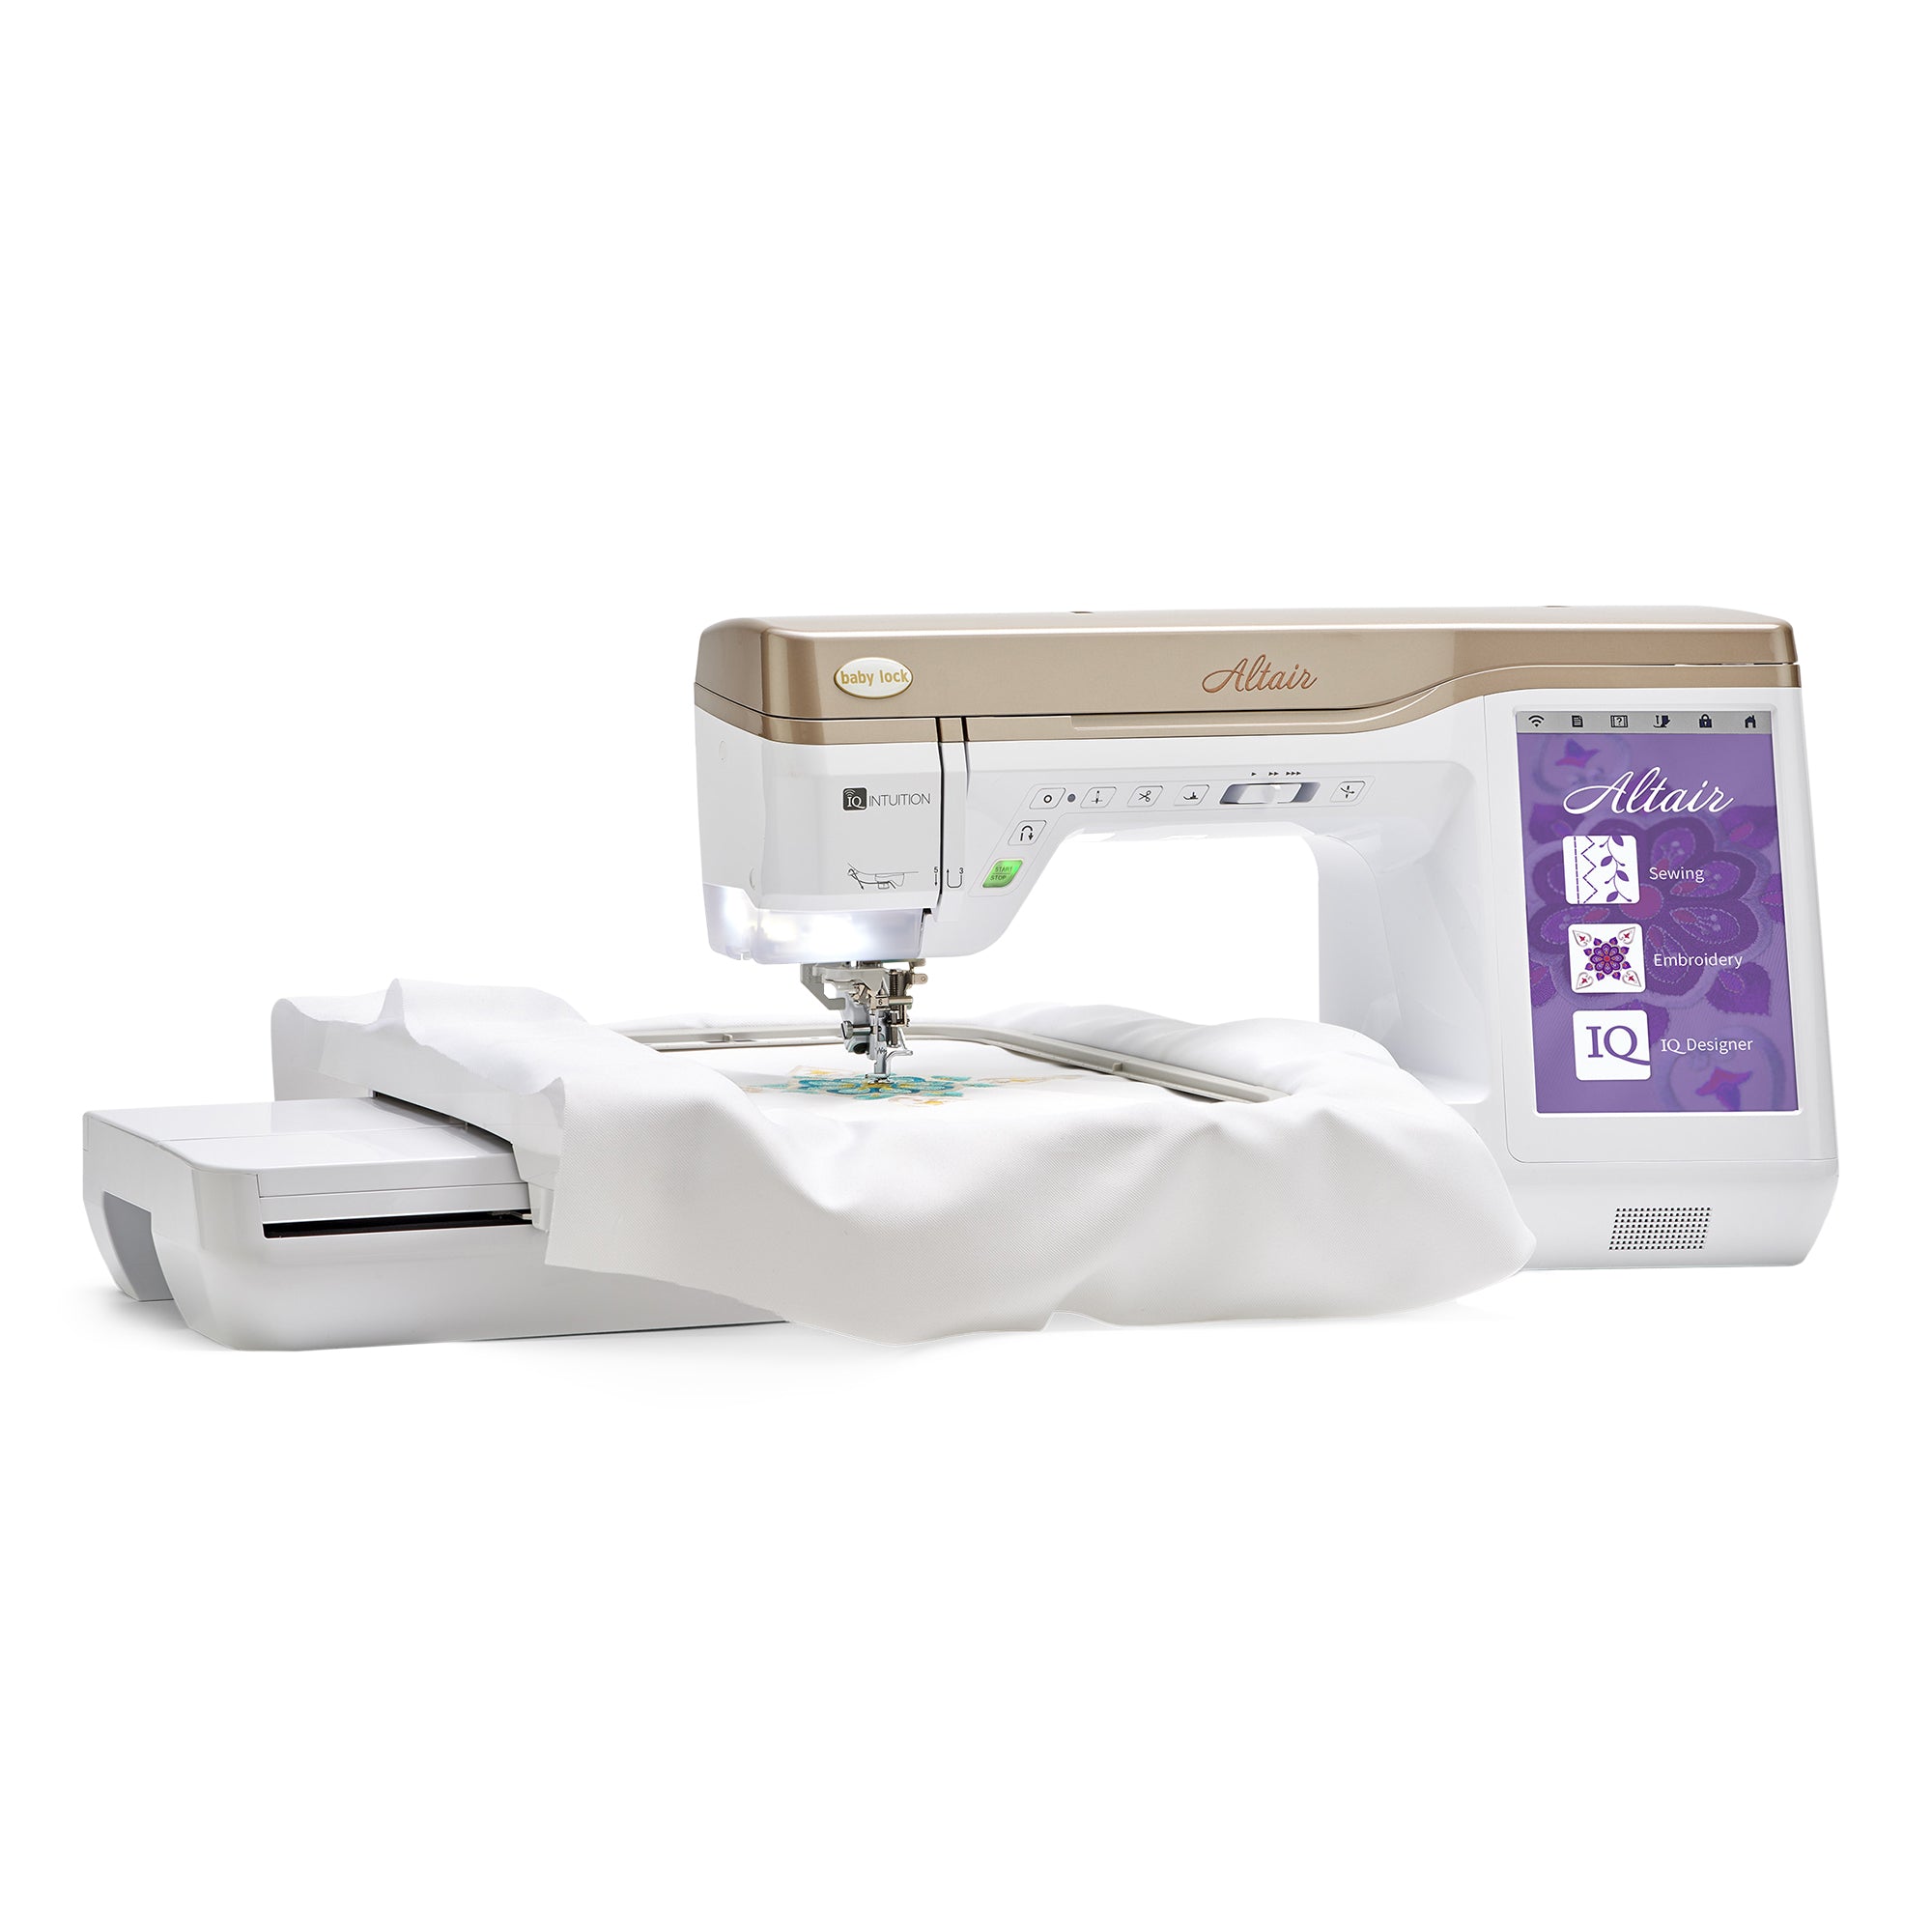 Baby Lock Altair Sewing & Embroidery Machine